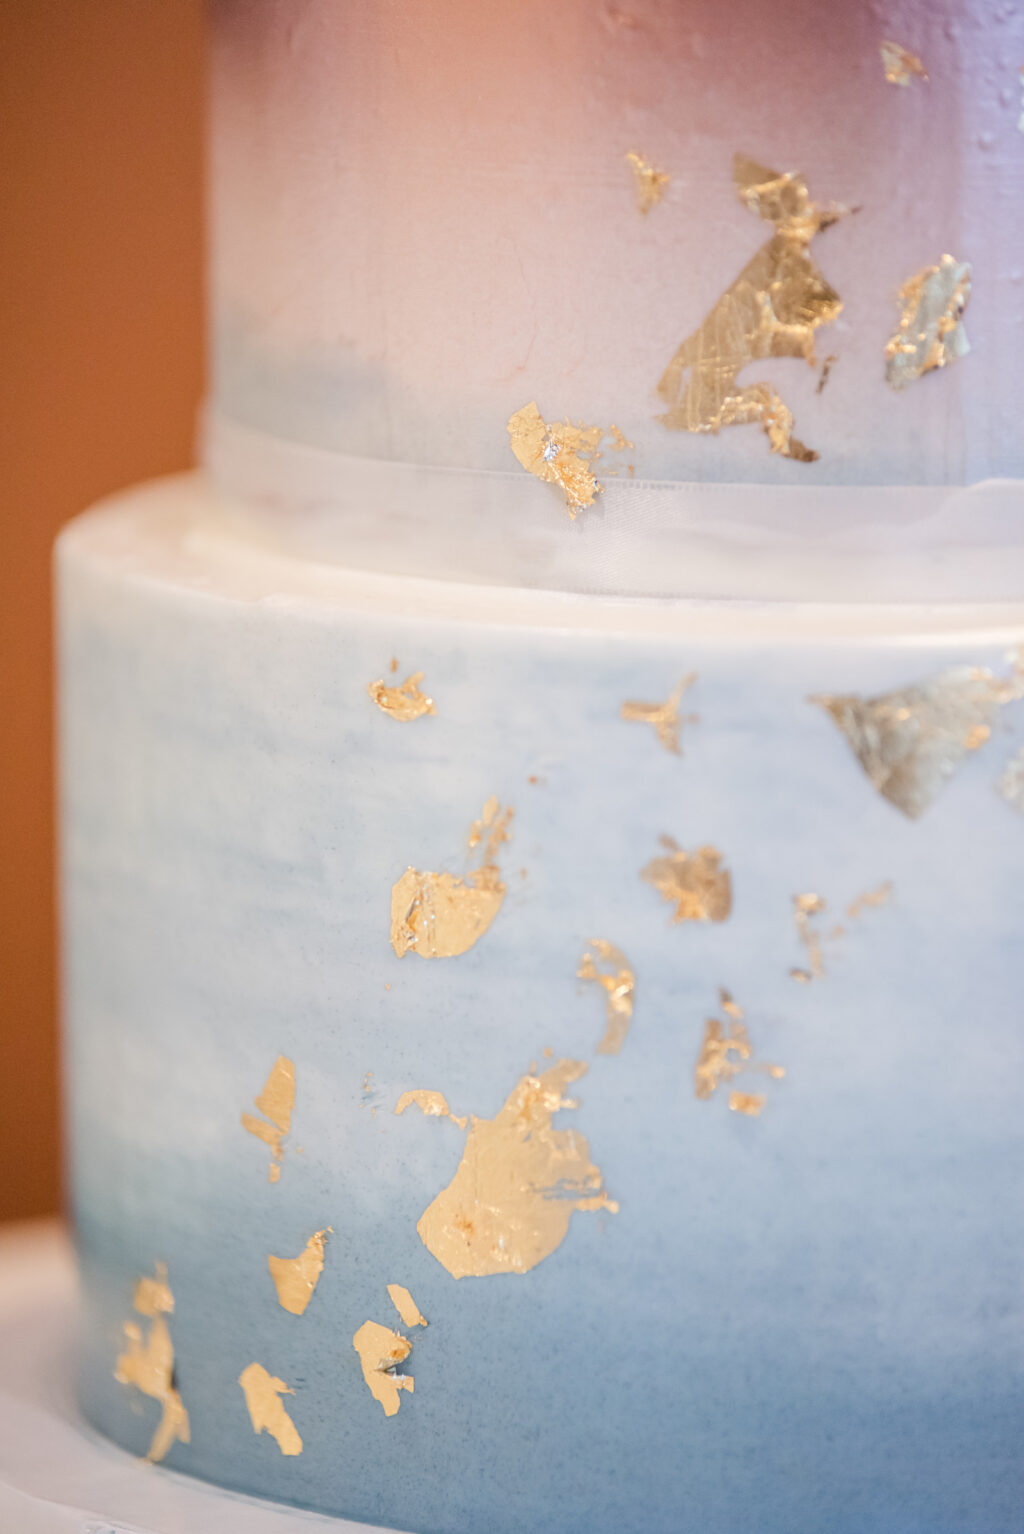 Two Tiered Dusty Blue and Rose Gold Ombre Wedding Cake with Rose Gold Cake Topper and Gold Flakes | Two Tiered Dusty Blue and Rose Gold Ombre Wedding Cake with Rose Gold Cake Topper and Gold Flakes | St. Pete Cake Baker The Artistic Whisk